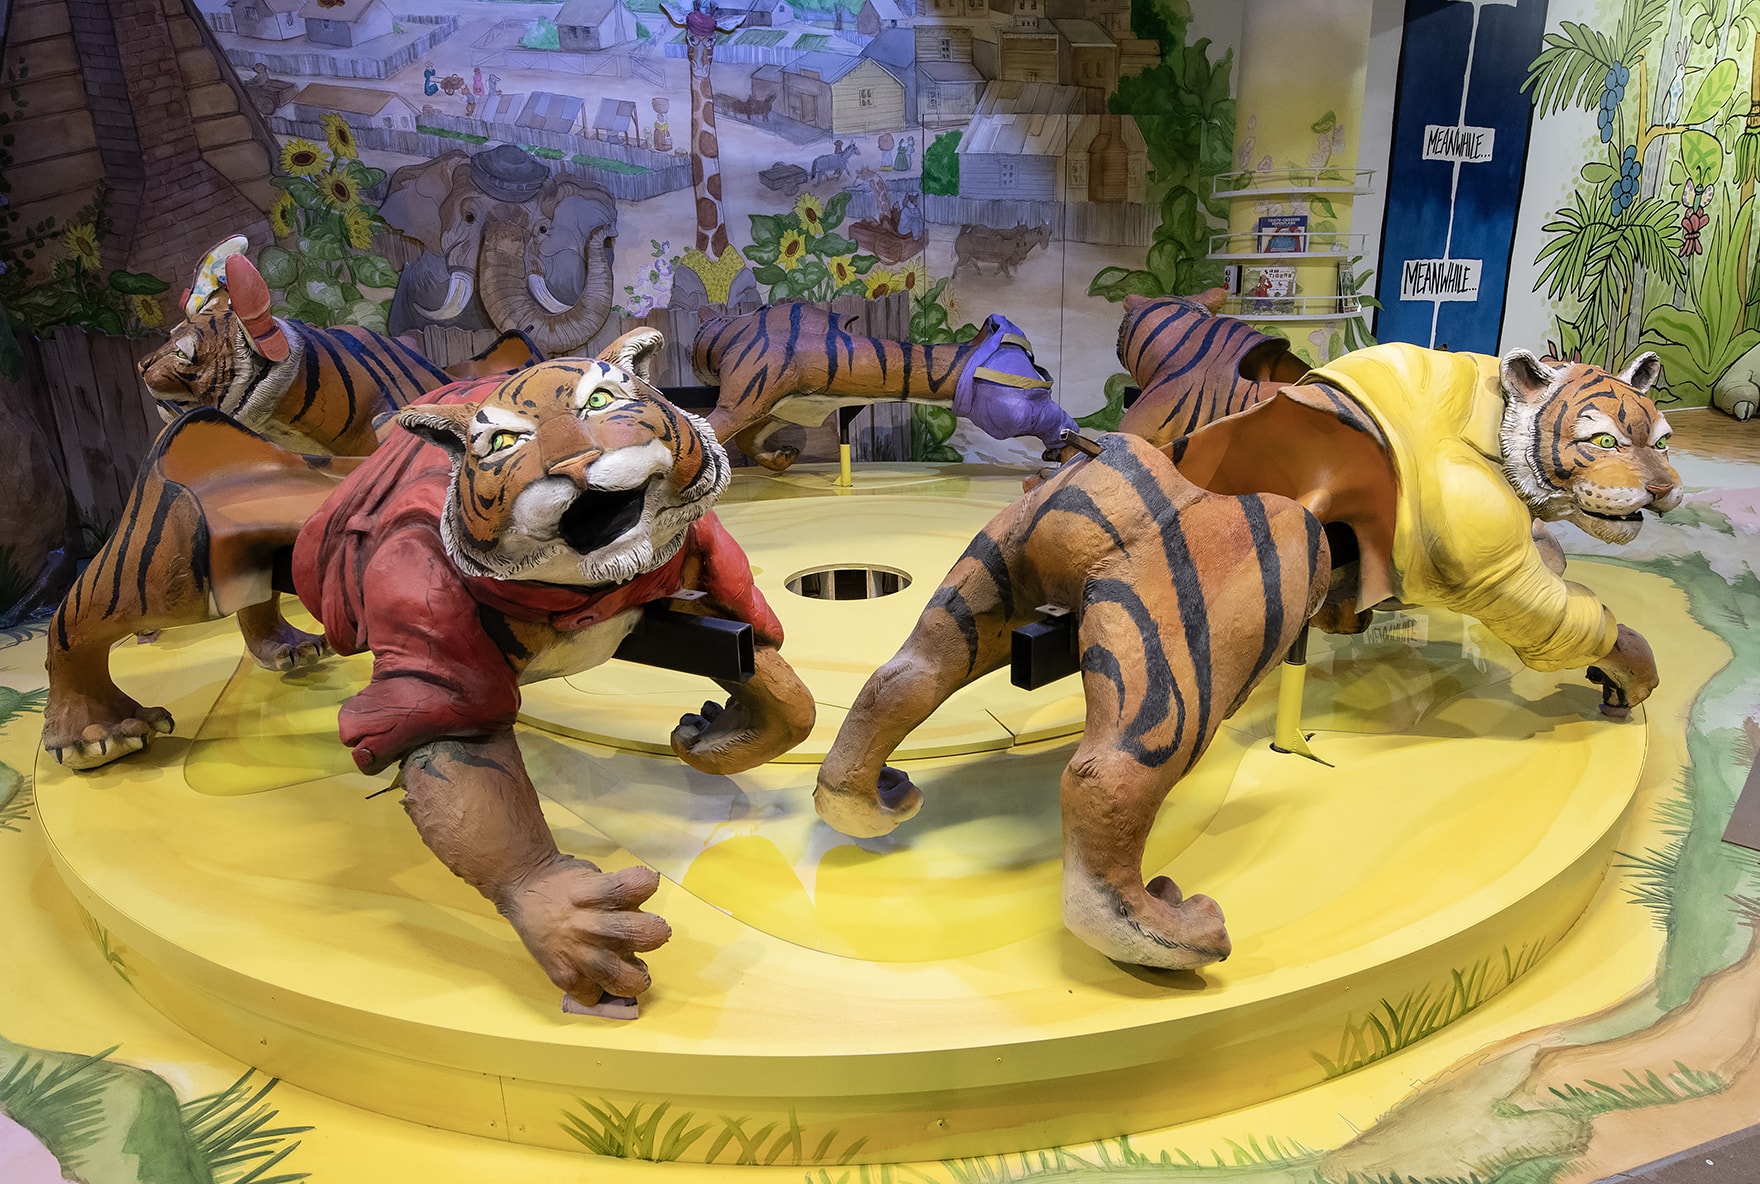 A colorful merry-go-round with tigers in an exhibit still in progress based on “Sam and the Tigers,” the book by Julius Lester. Each exhibit includes bookshelves.